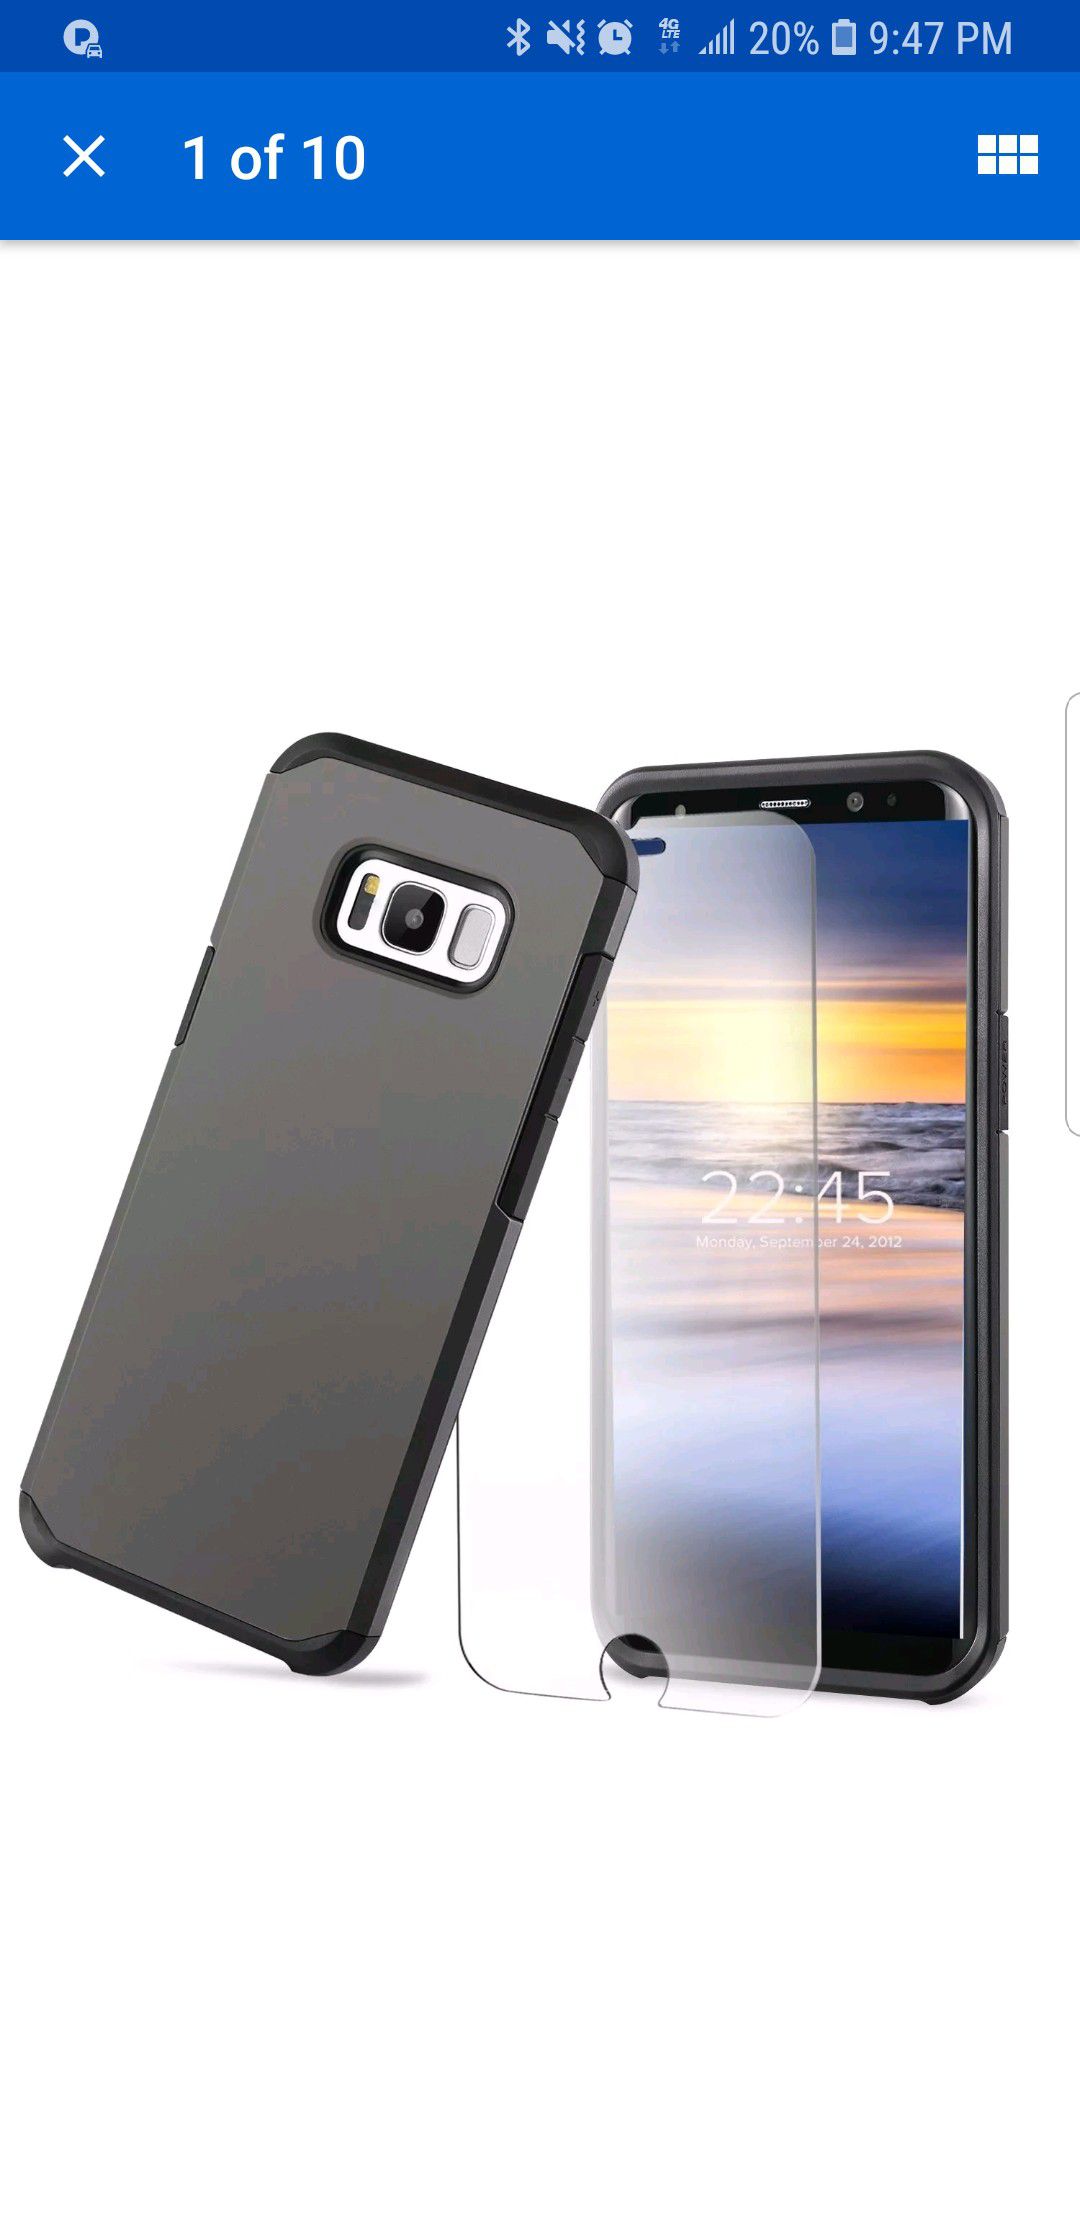 Galaxy 8s plus case and glass protector